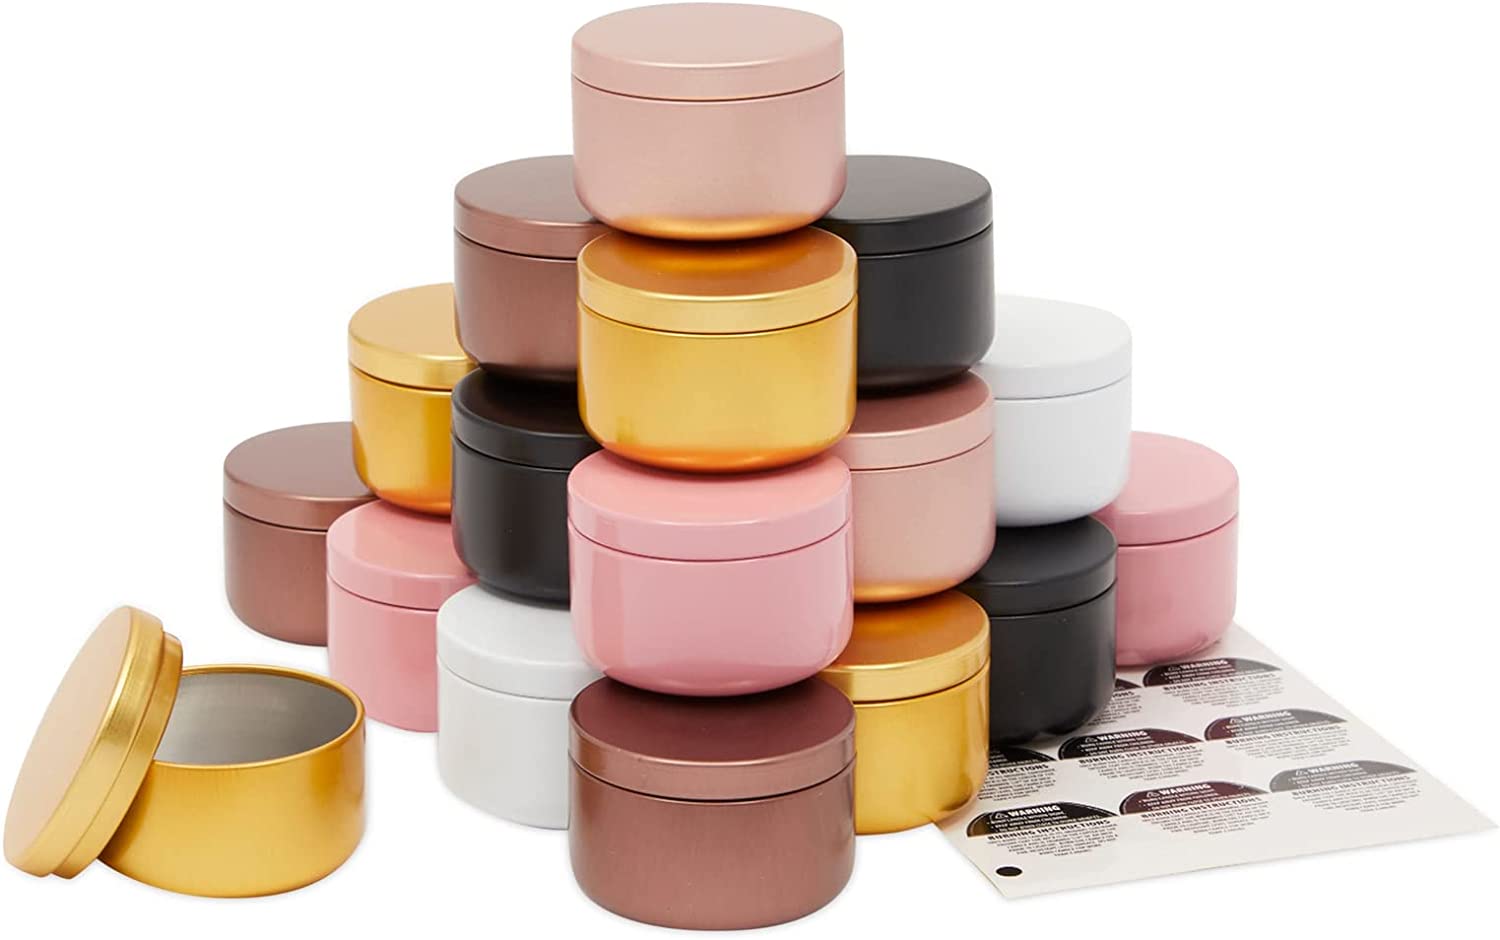 24 Pack Metal Candle Tins 2oz, Small Cans with Lids Bulk with Warning Stickers for Candle Making (6 Colors)